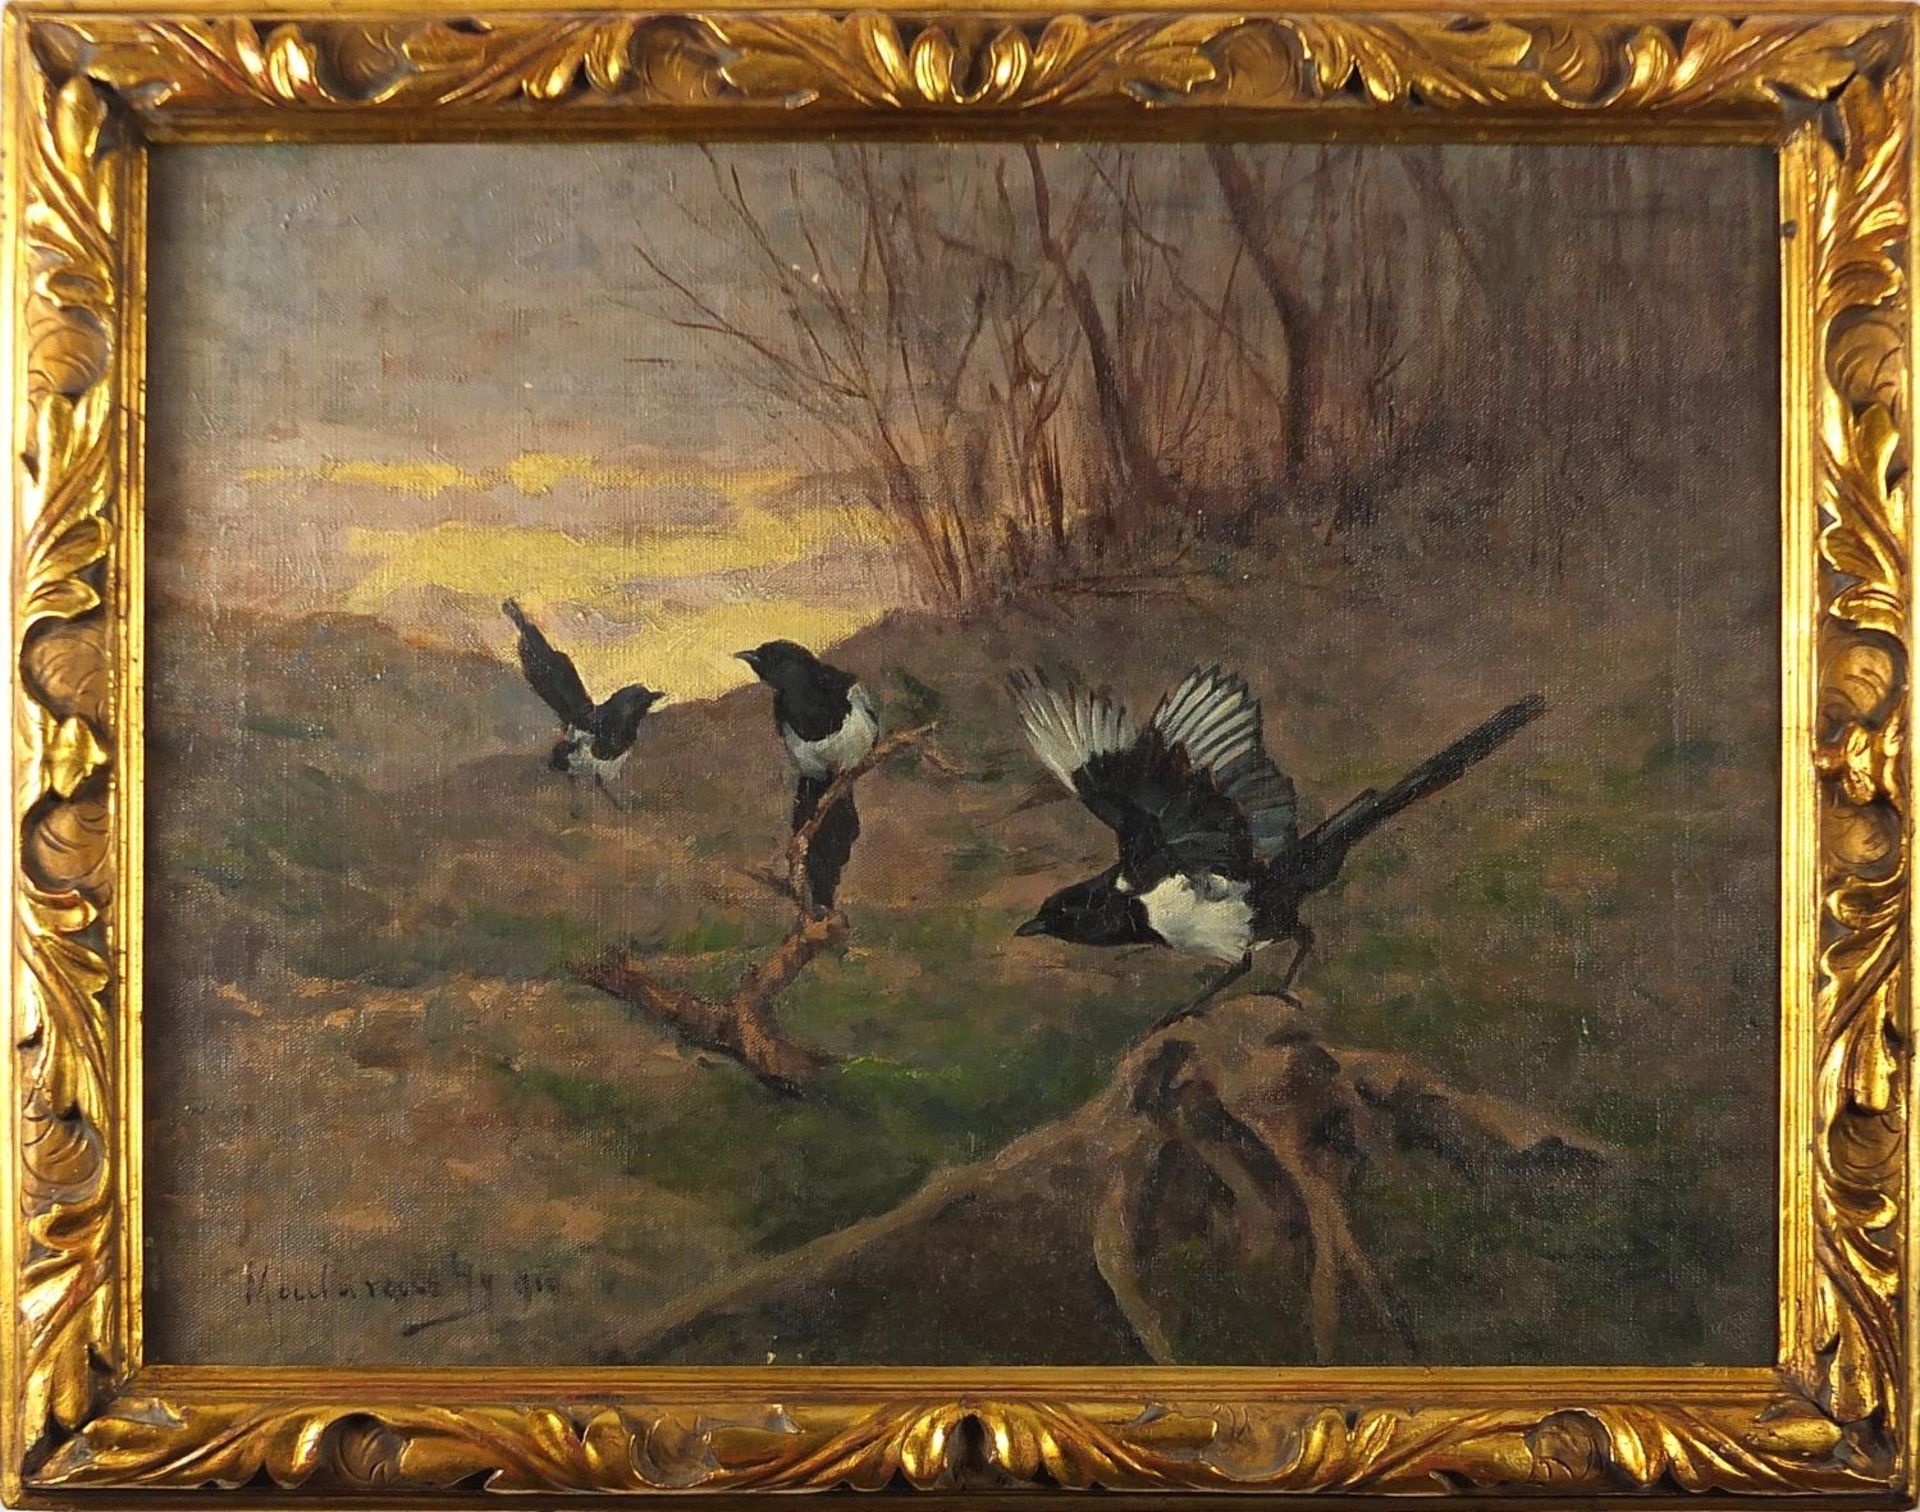 Adelina Katona Madarasz 1910 - Magpies in a landscape, early 20th century signed oil on canvas, - Image 2 of 4